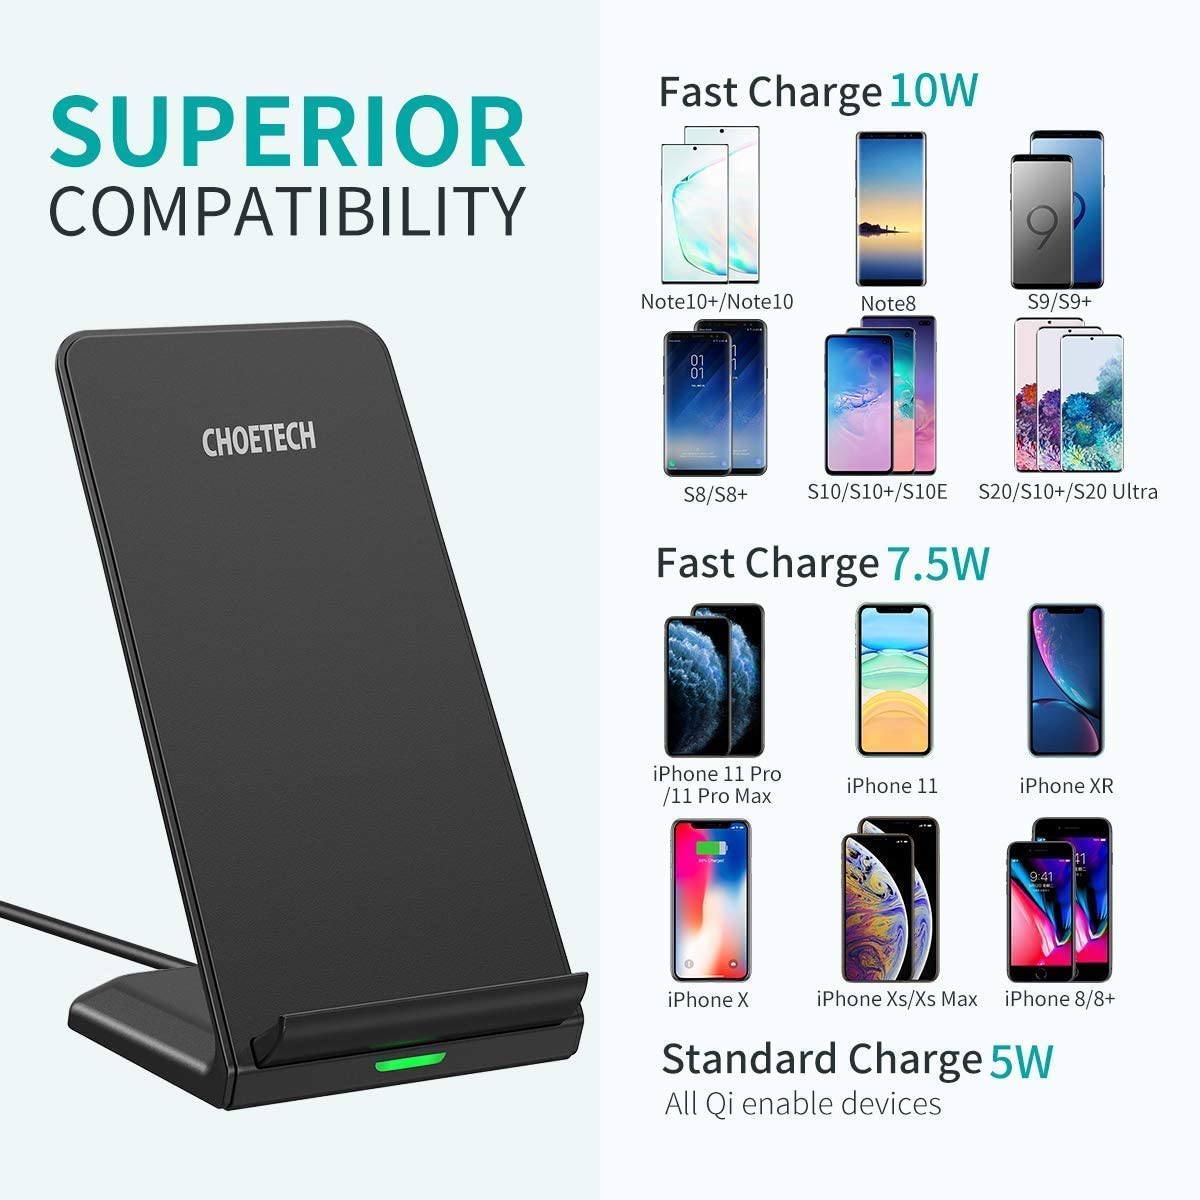 CHOETECH Wireless Charger Qi-Certified 10W Fast Charging Stand (with AC Adapter)